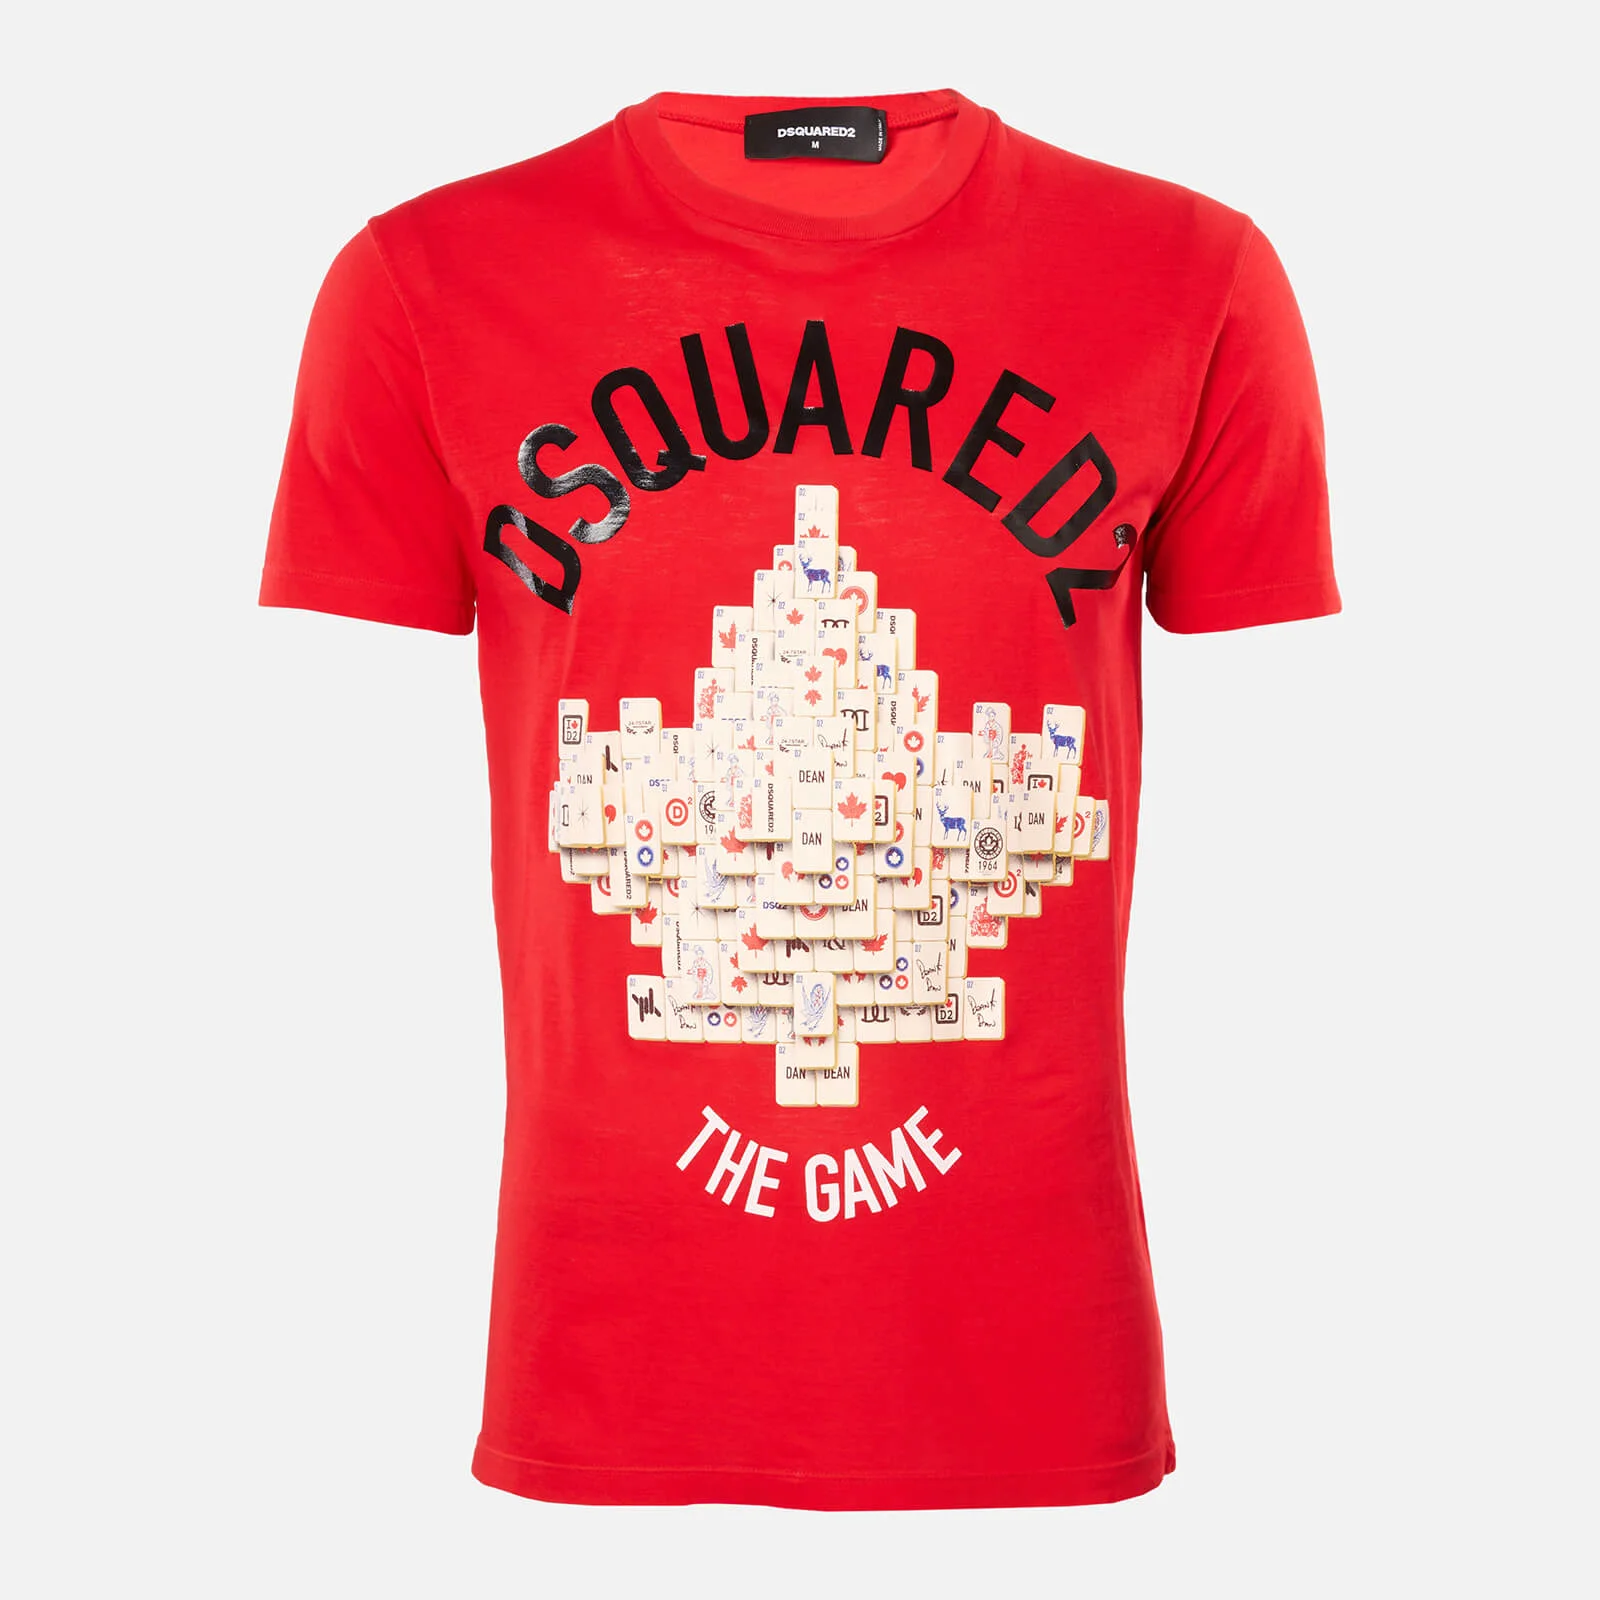 Dsquared2 Men's Arch Logo T-Shirt - Red Image 1